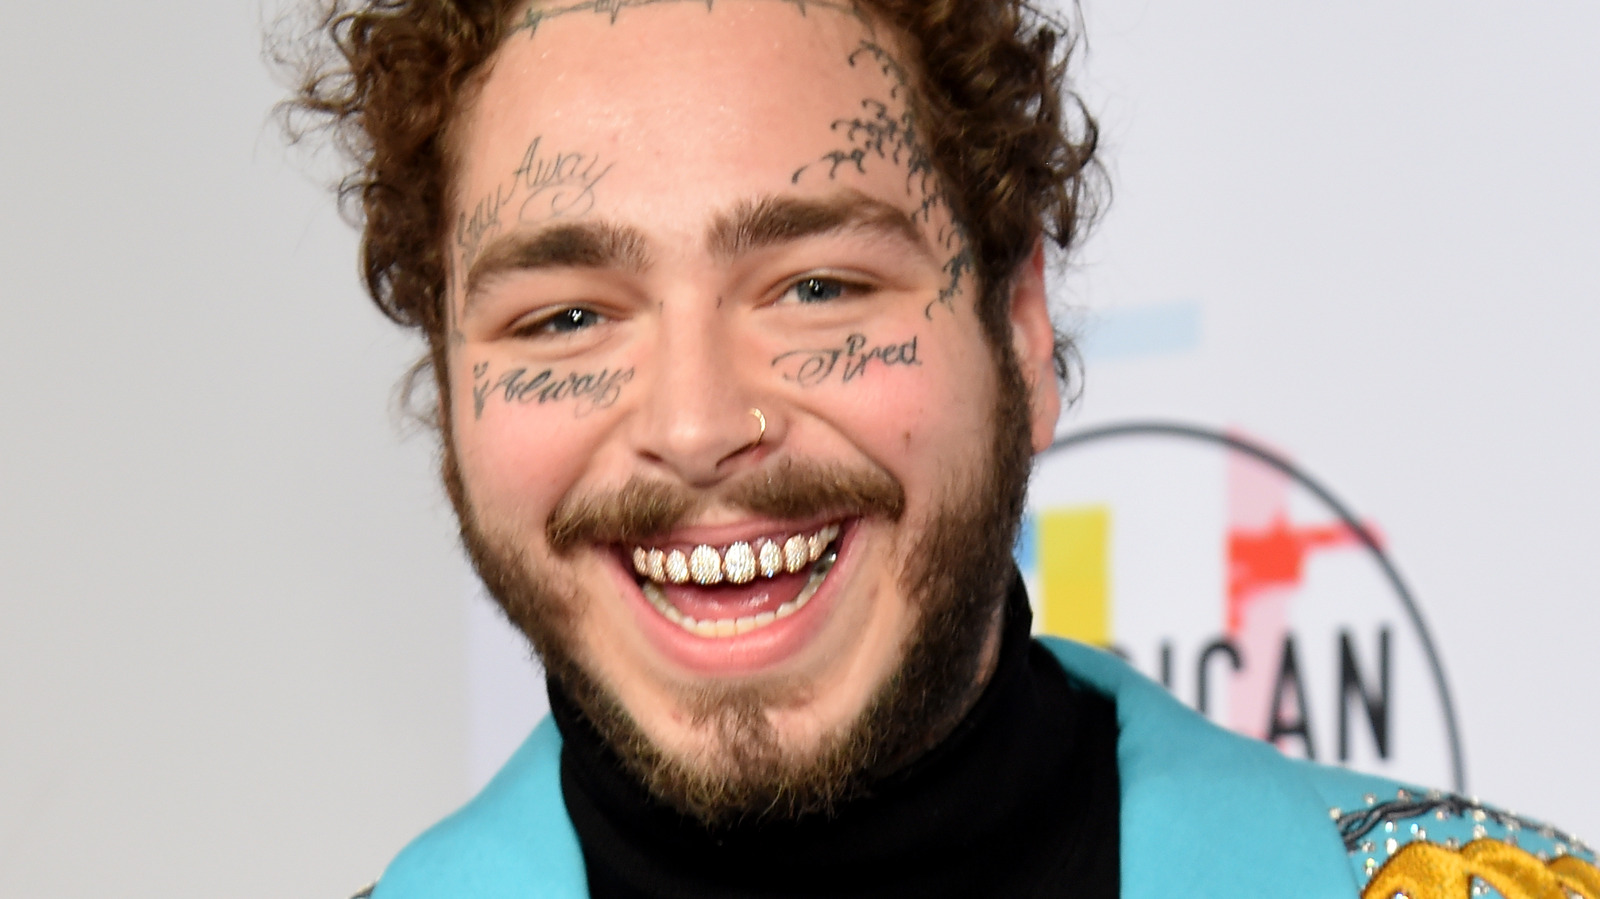 Post Malone Explains Why He Has Face Tattoos in New Interview